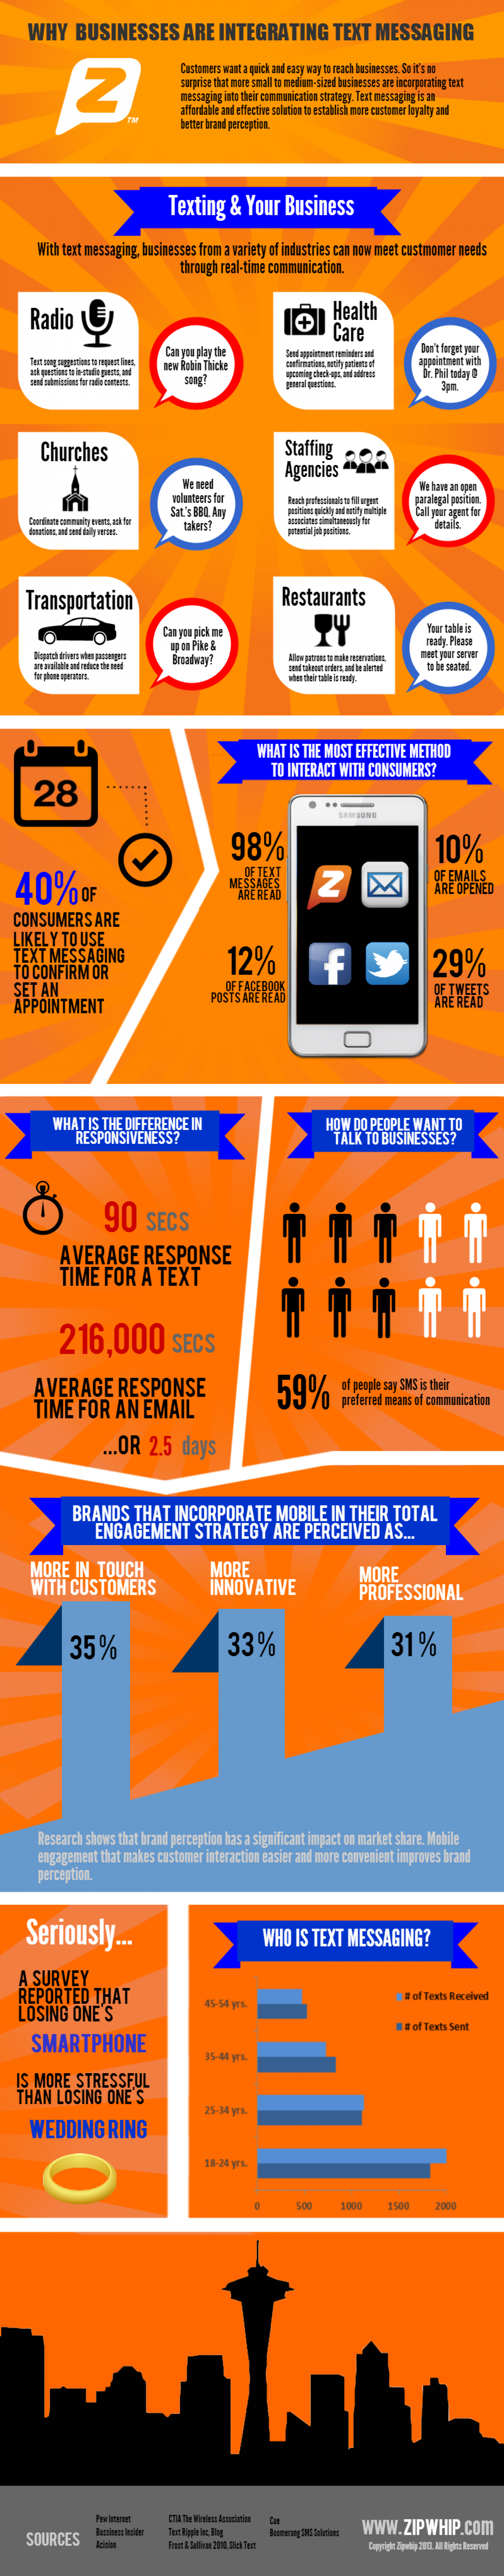 Why Businesses are Integrating Text Messaging Infographic